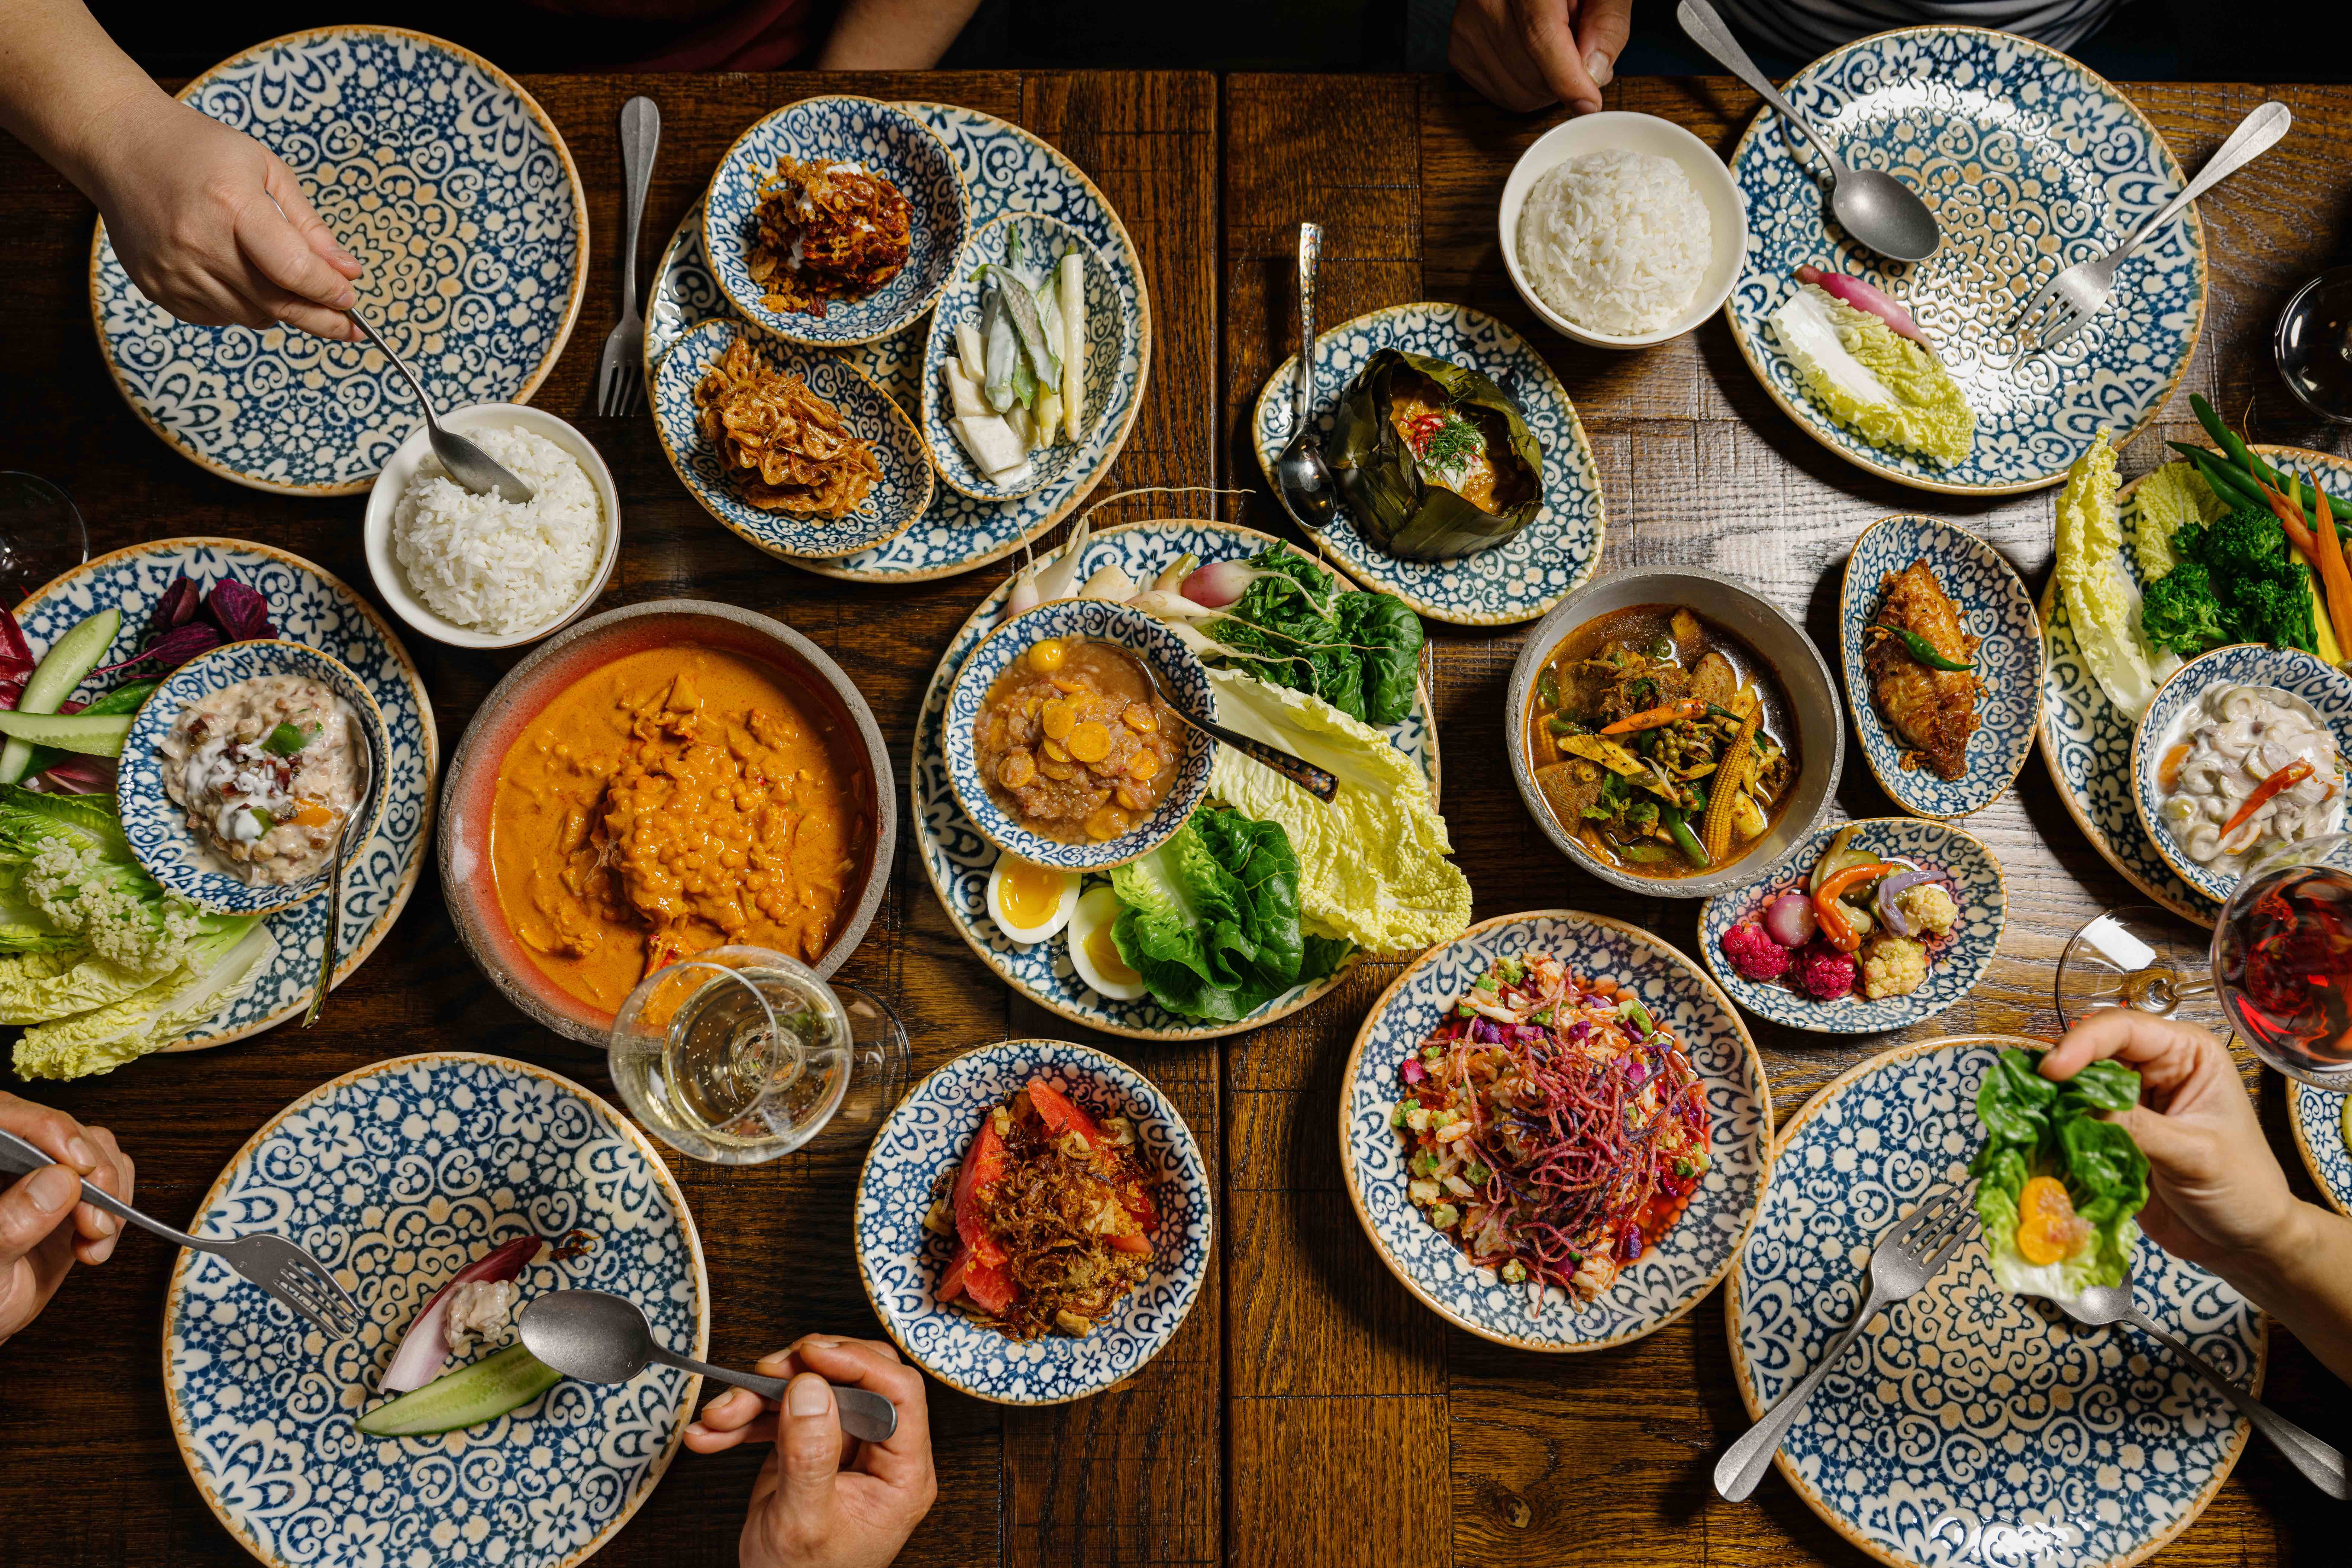 Thai food is displayed in various blue and white bowls on a wooden table.